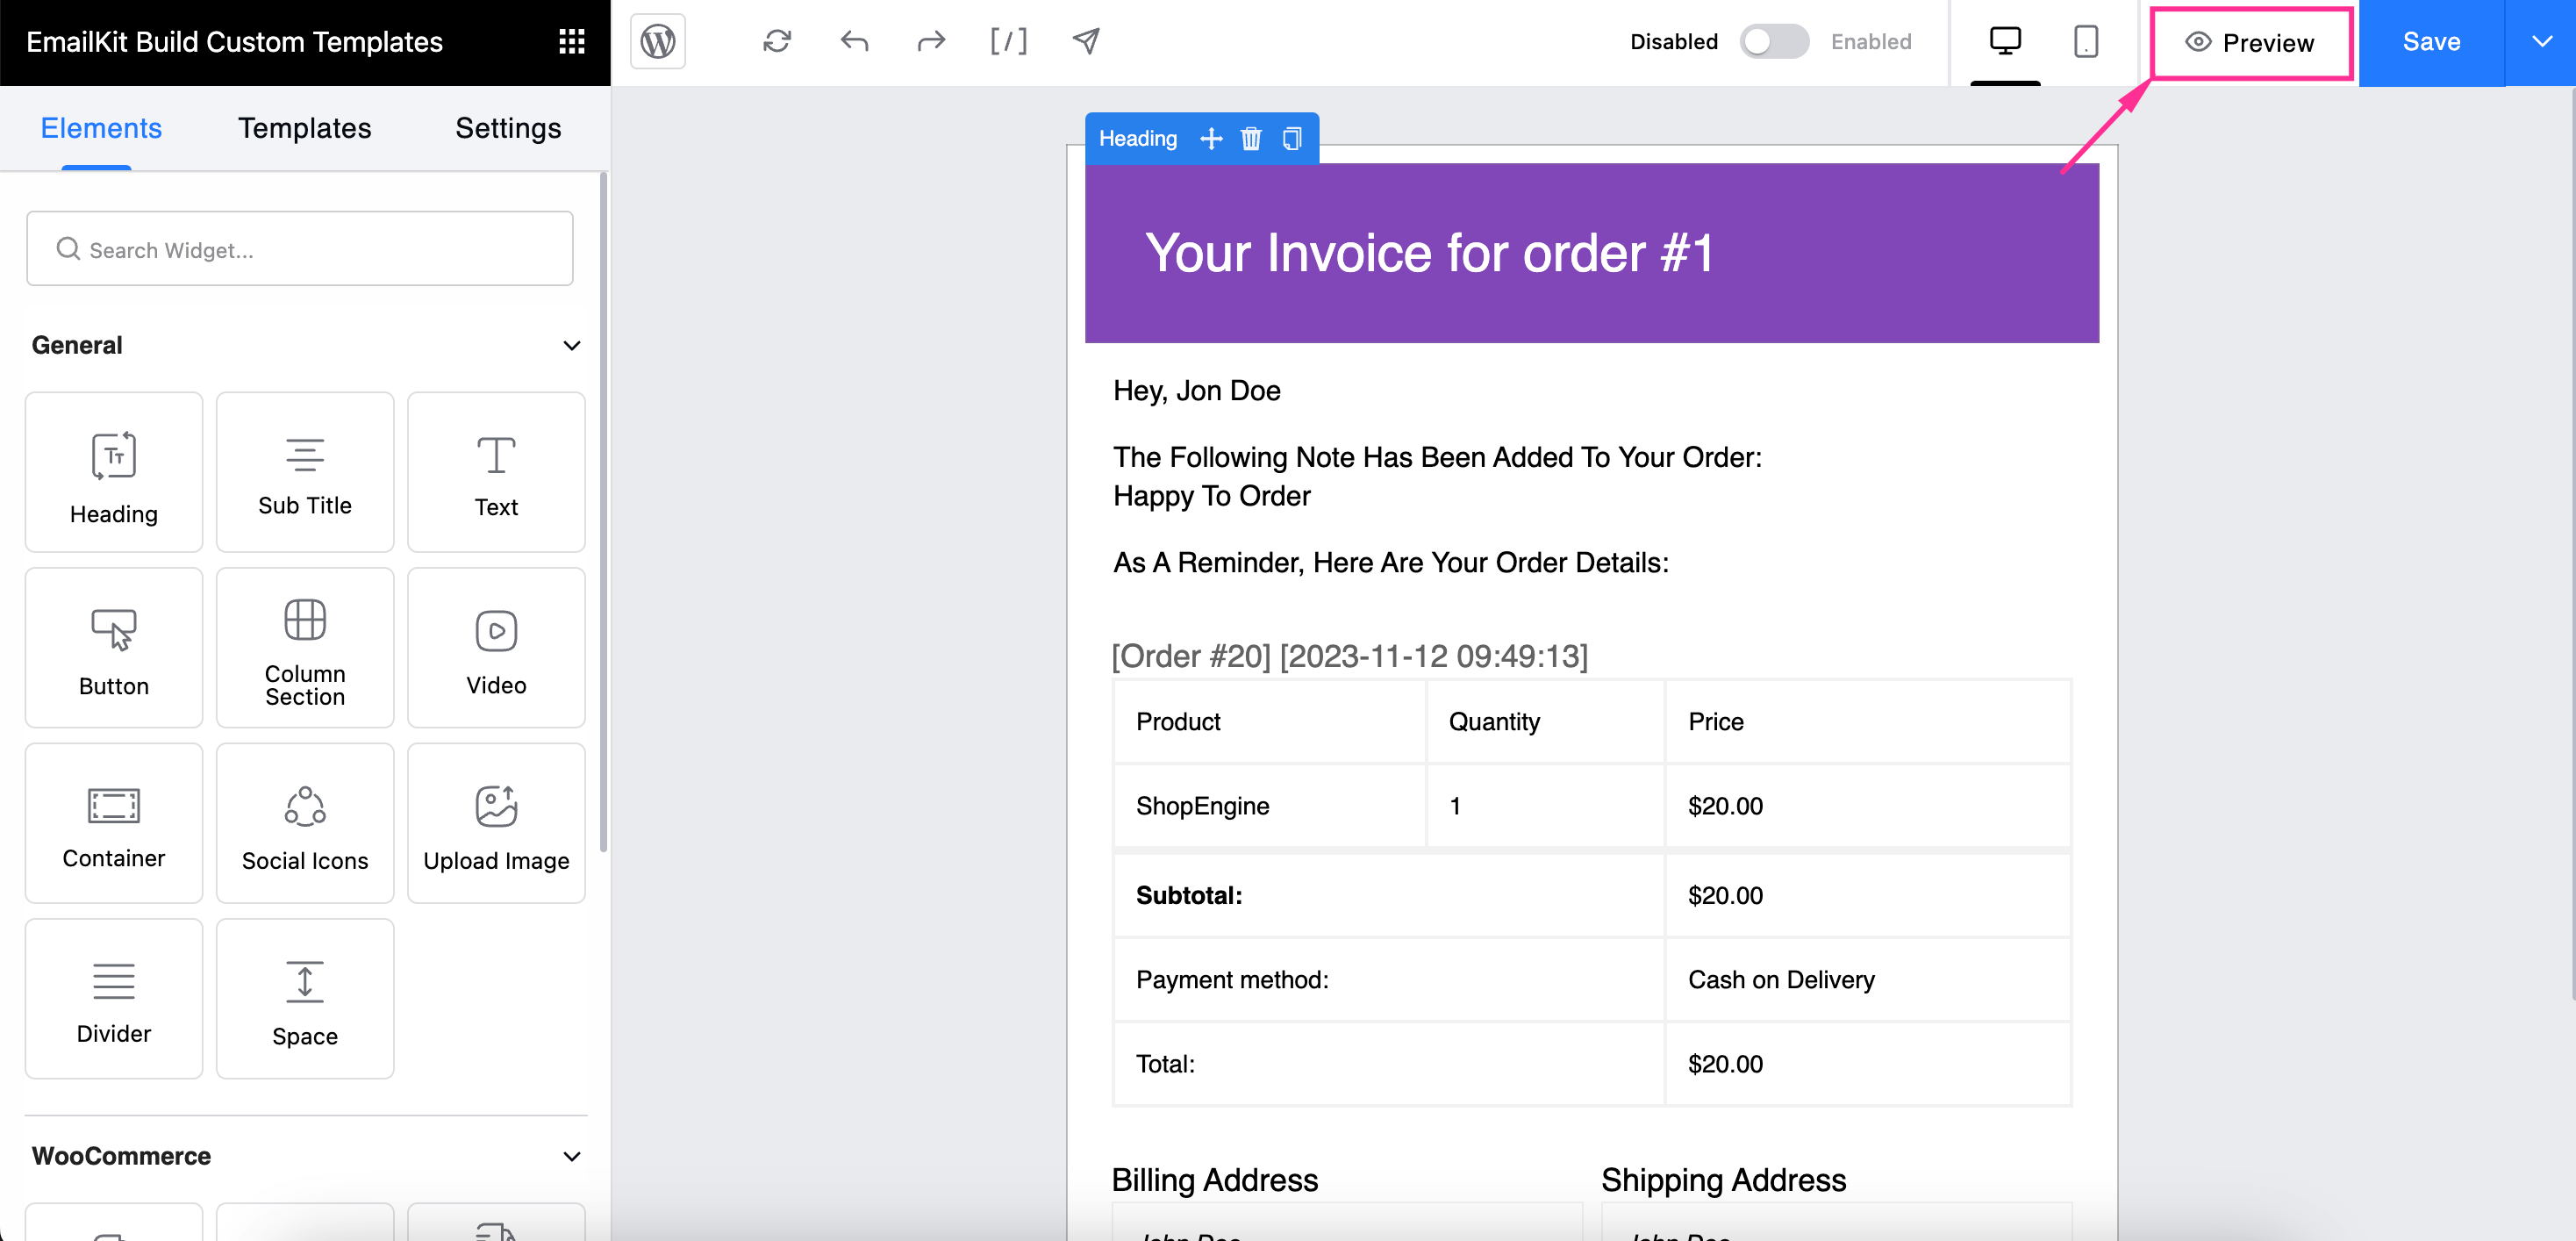 Preview WooCommerce emails using EmailKit